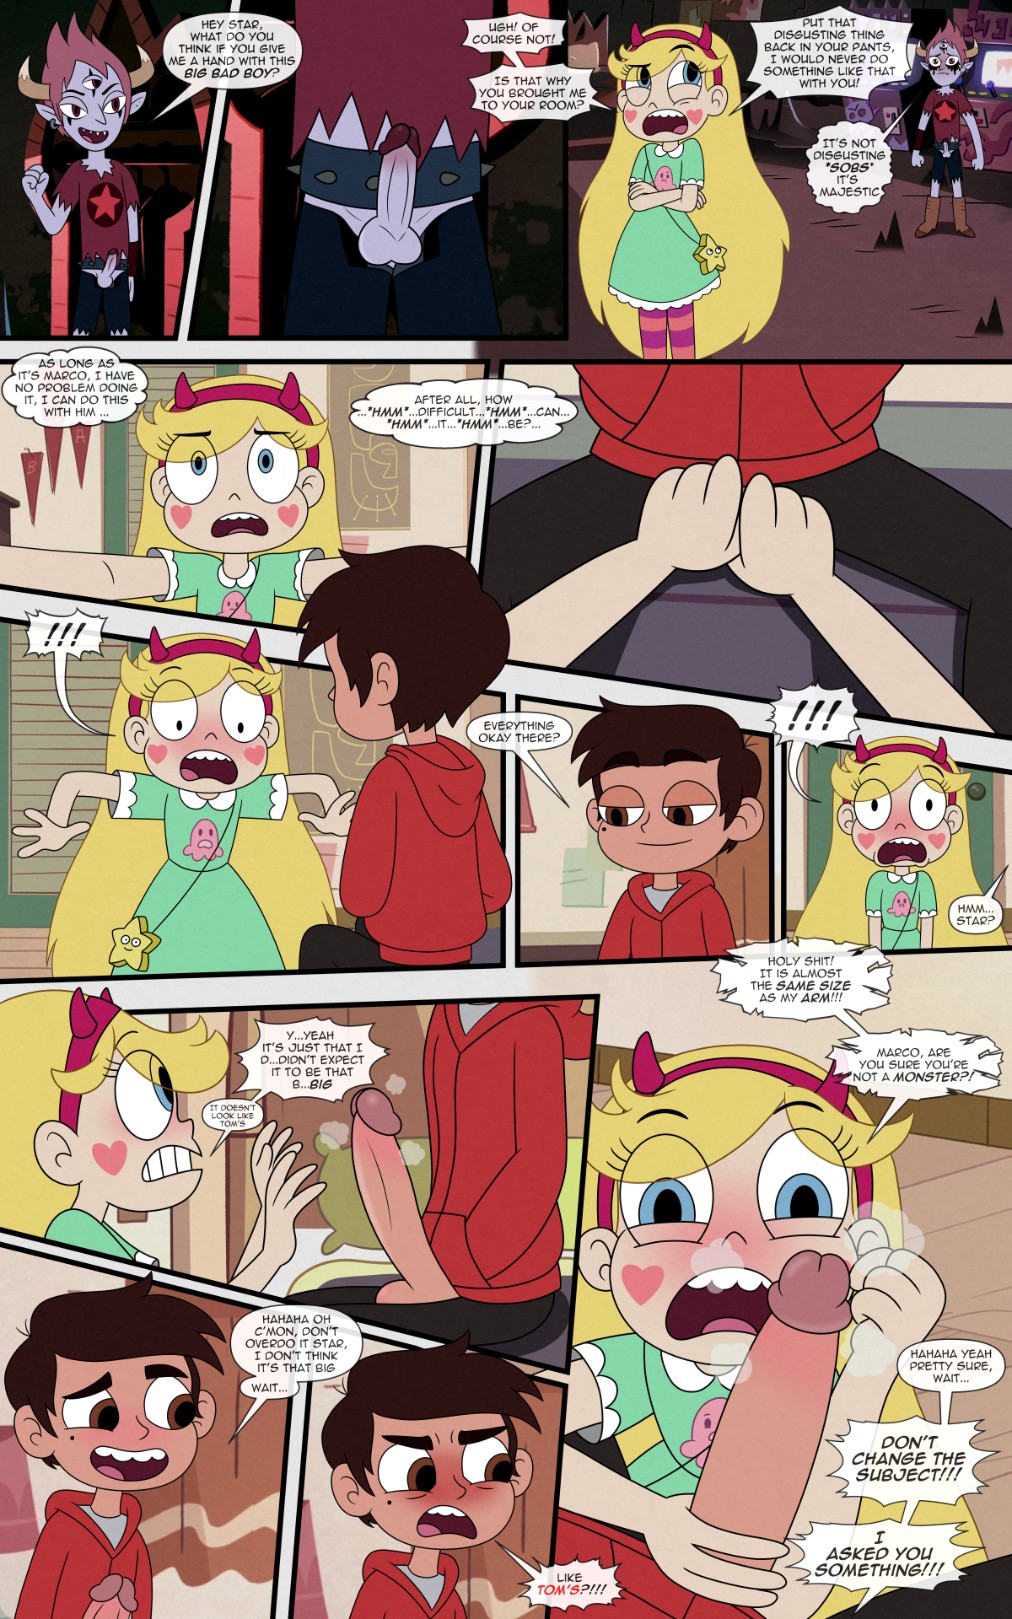 Time Together Star Vs The Forces Of Evil 01